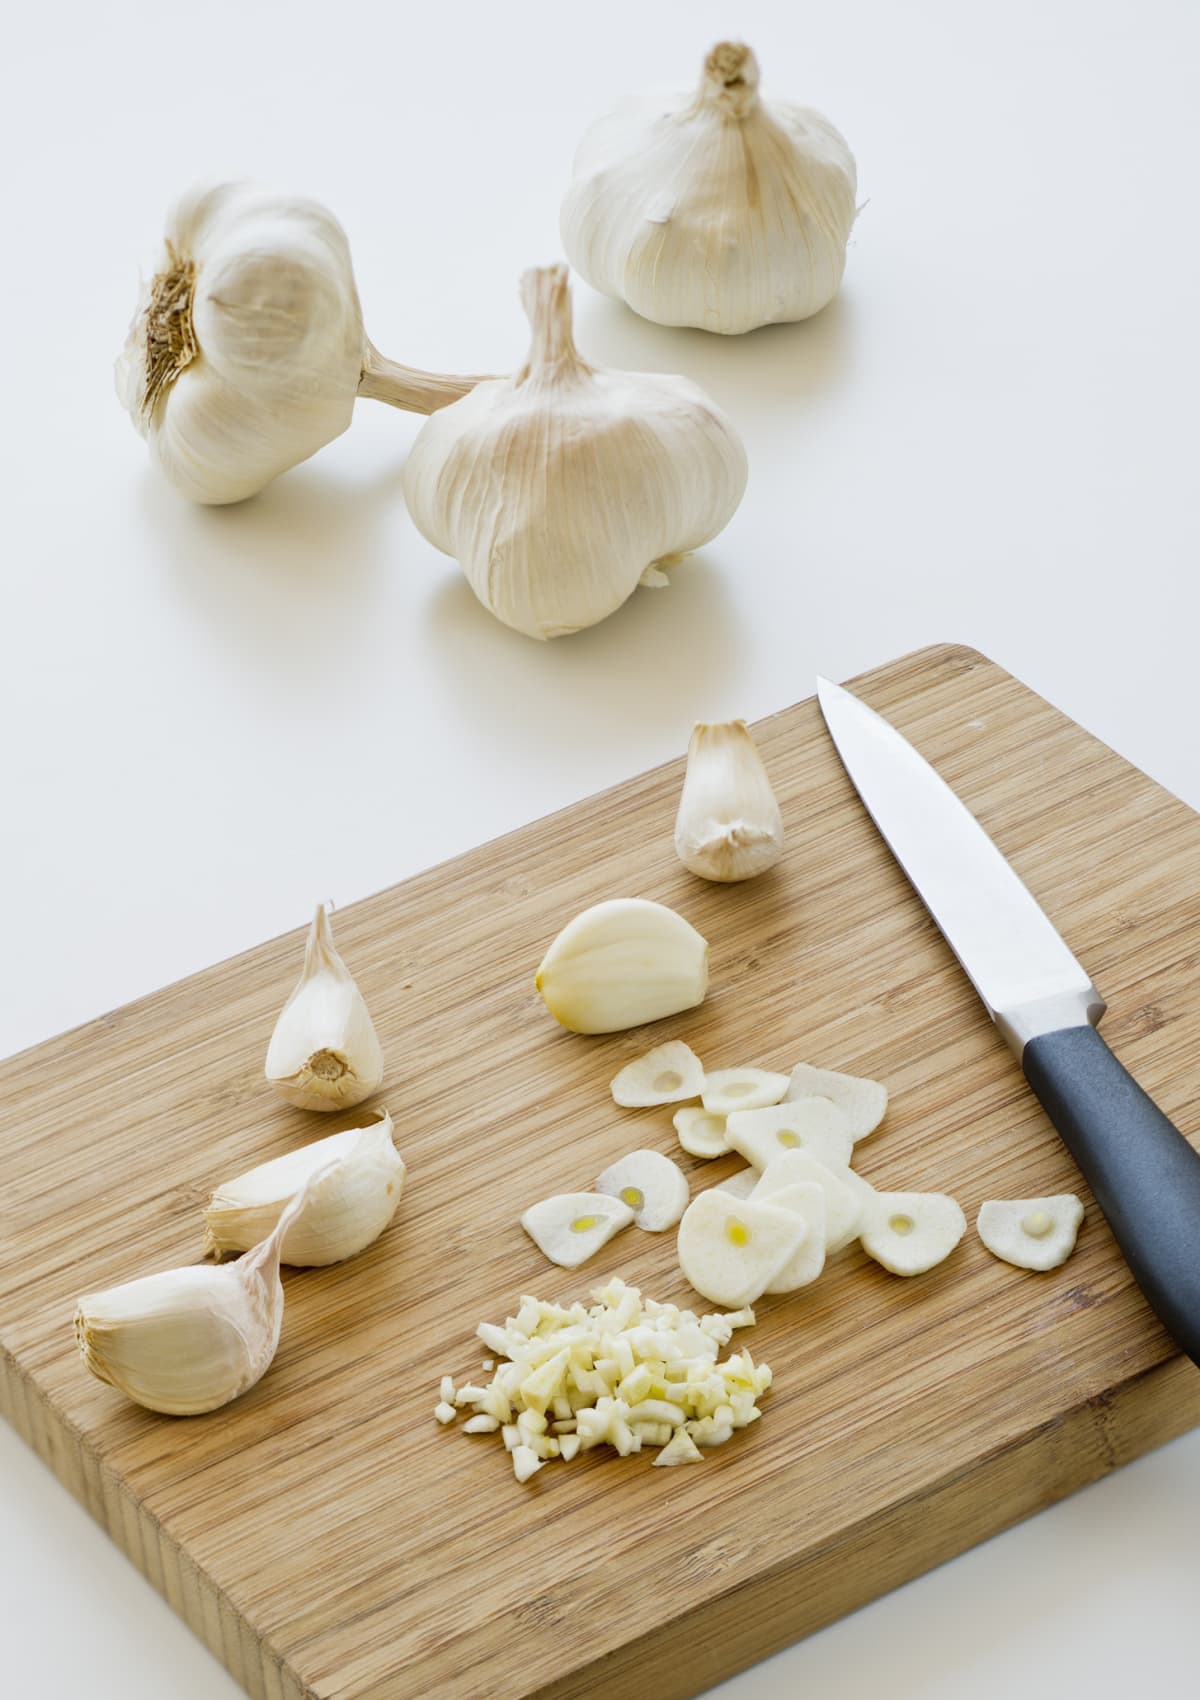 whole cloves of garlic next to individual cloves on a cutting board with knife